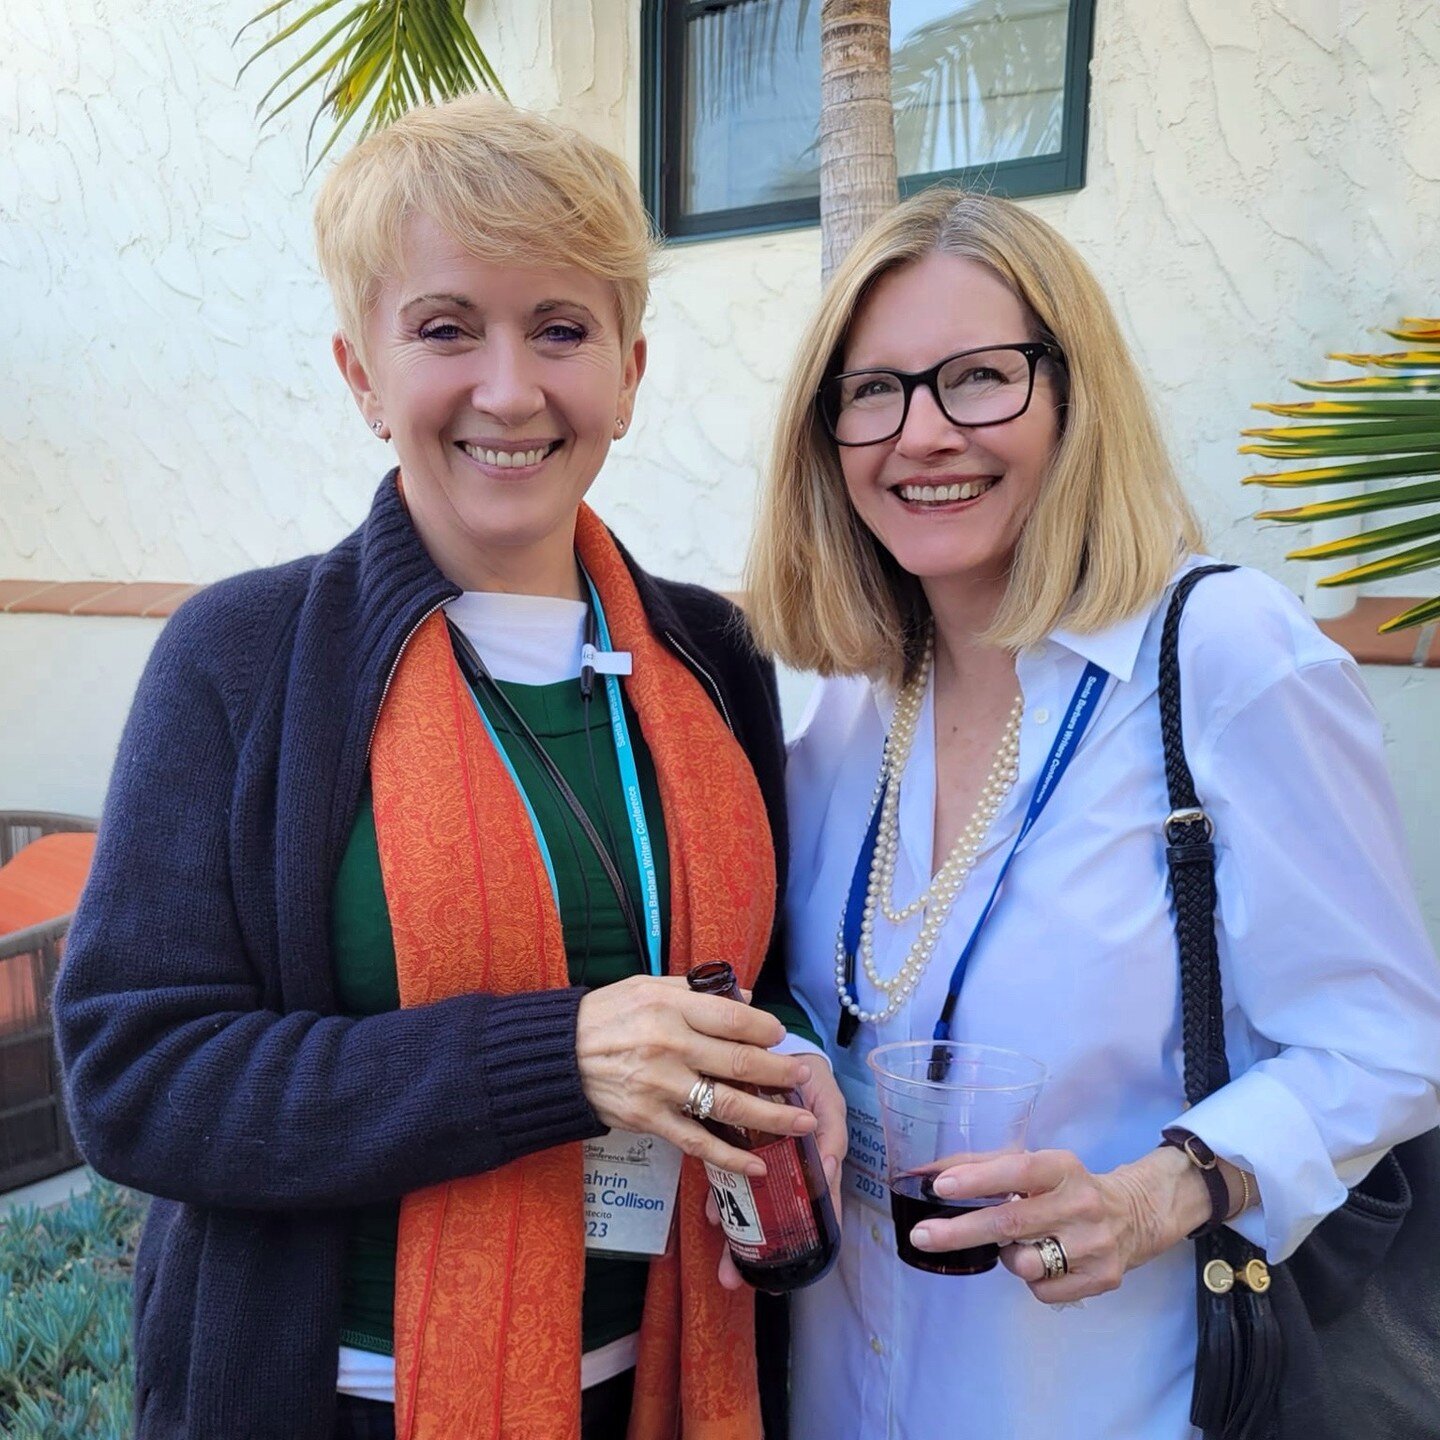 Karin Collison and Melody Johnson Howe, both actor/author combos at SBWC 2023